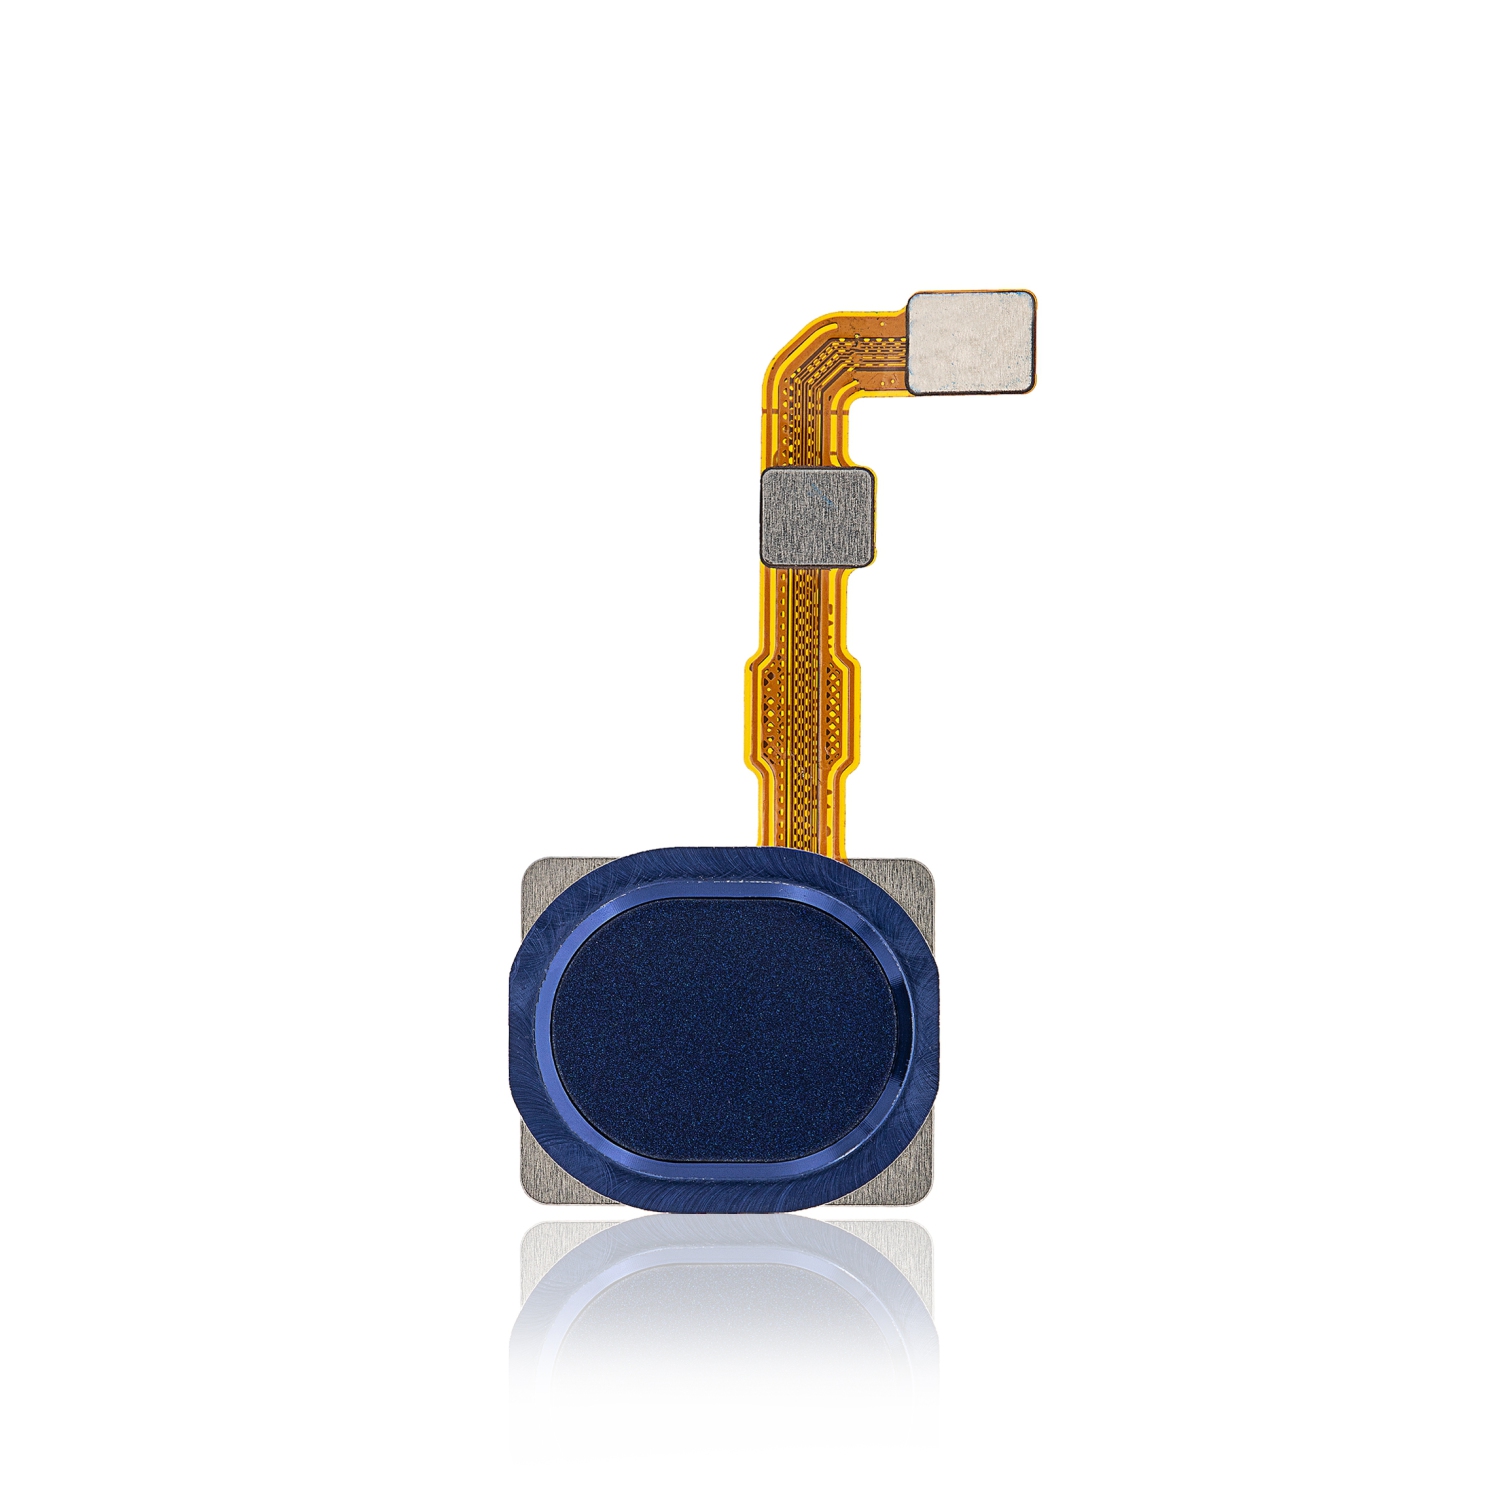 Replacement Fingerprint Reader With Flex Cable Compatible For Samsung Galaxy A20s (A207 / 2019) (Blue)